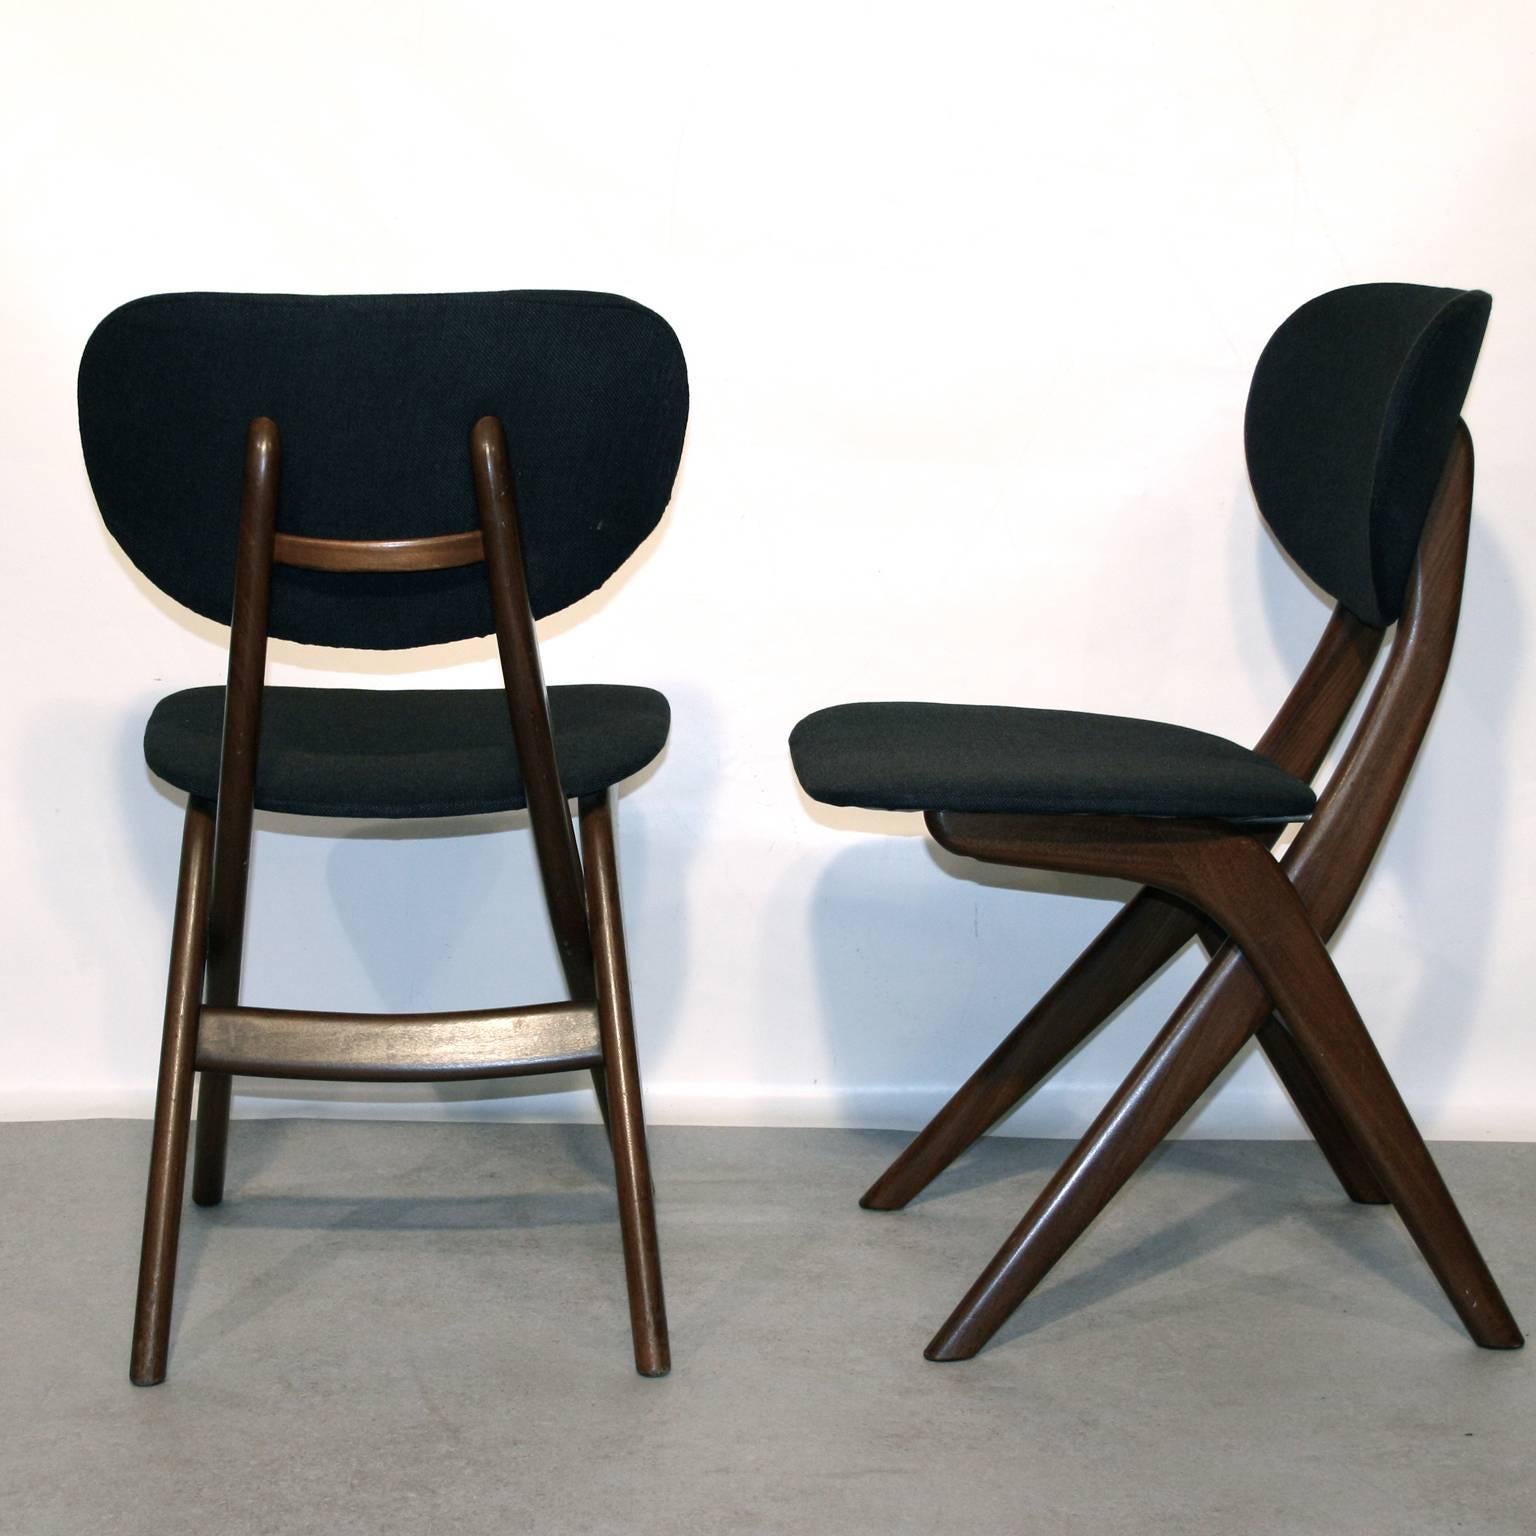 Mid-20th Century Dining Chairs by Louis Van Teeffelen for Wébé, Dutch Design, 1950s For Sale